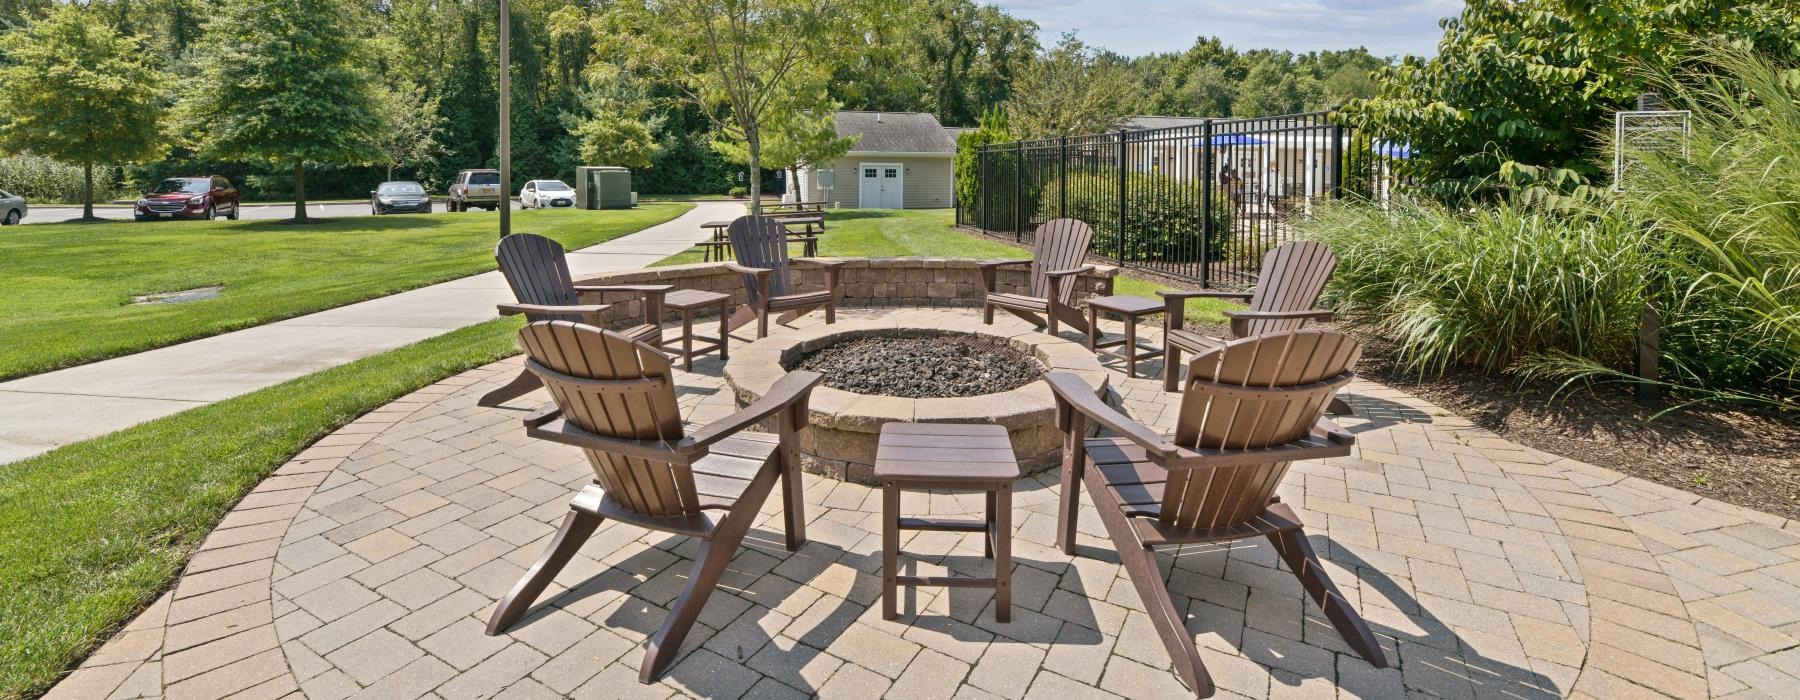 a patio with chairs and tables near lush green turf